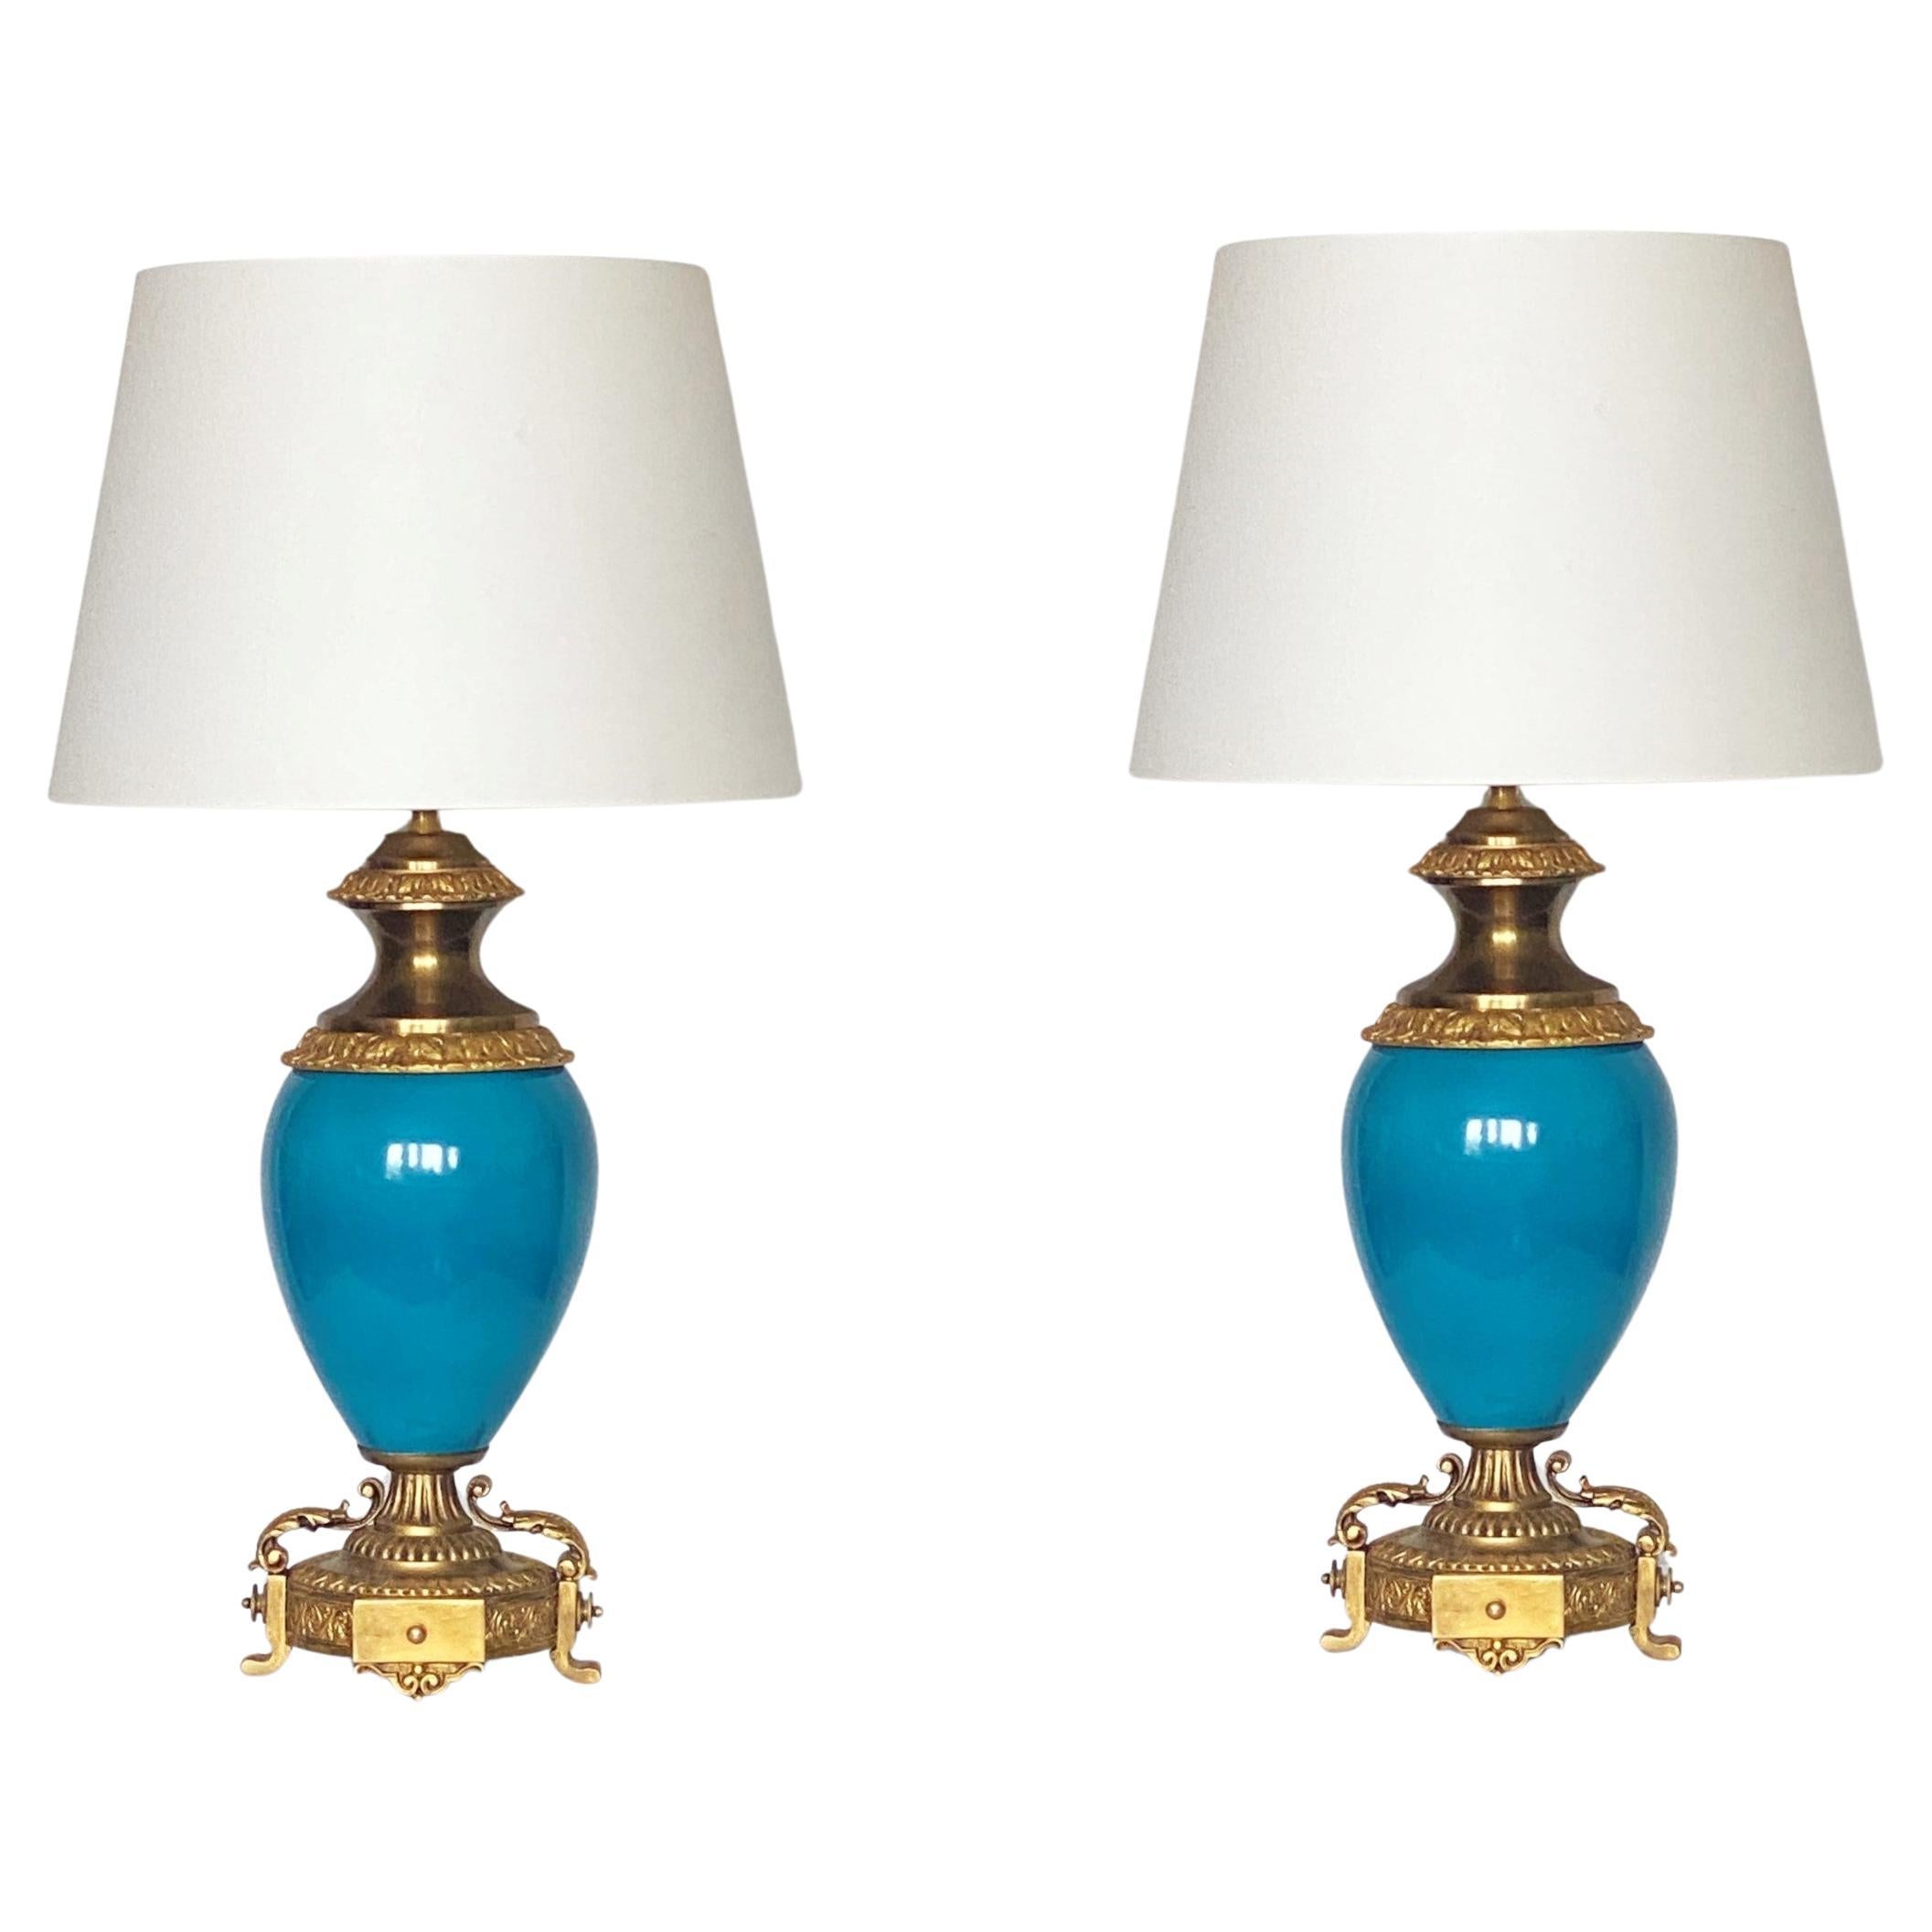 Pair of Glazed Blue Porcelain Bronze Table Lamps, 1920s  For Sale